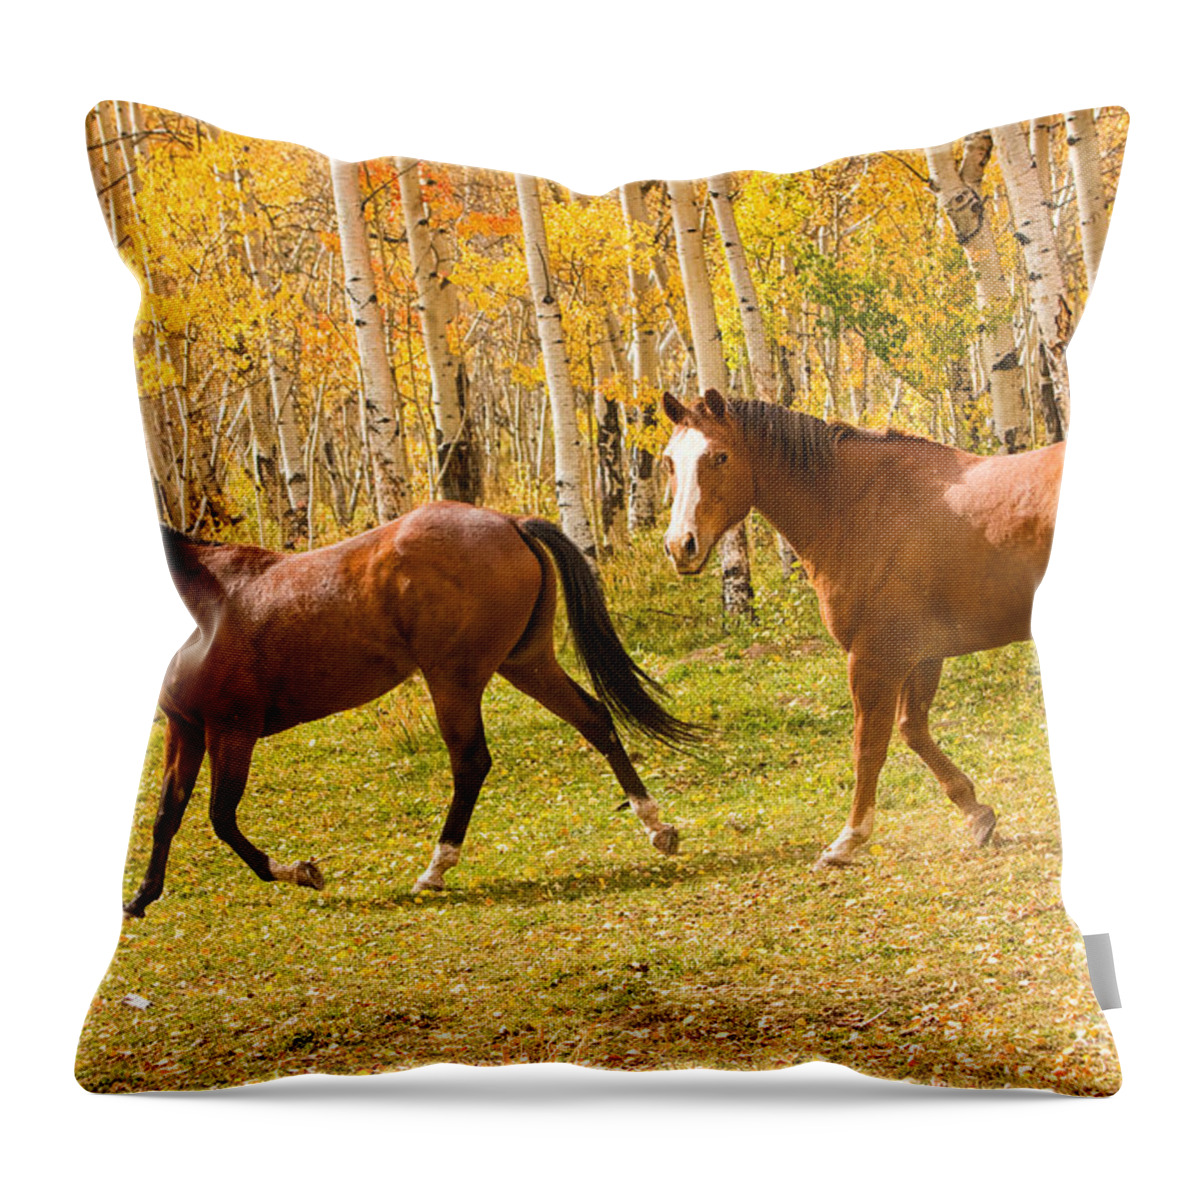 Horses Throw Pillow featuring the photograph Wild Trotting Autumn Horses by James BO Insogna